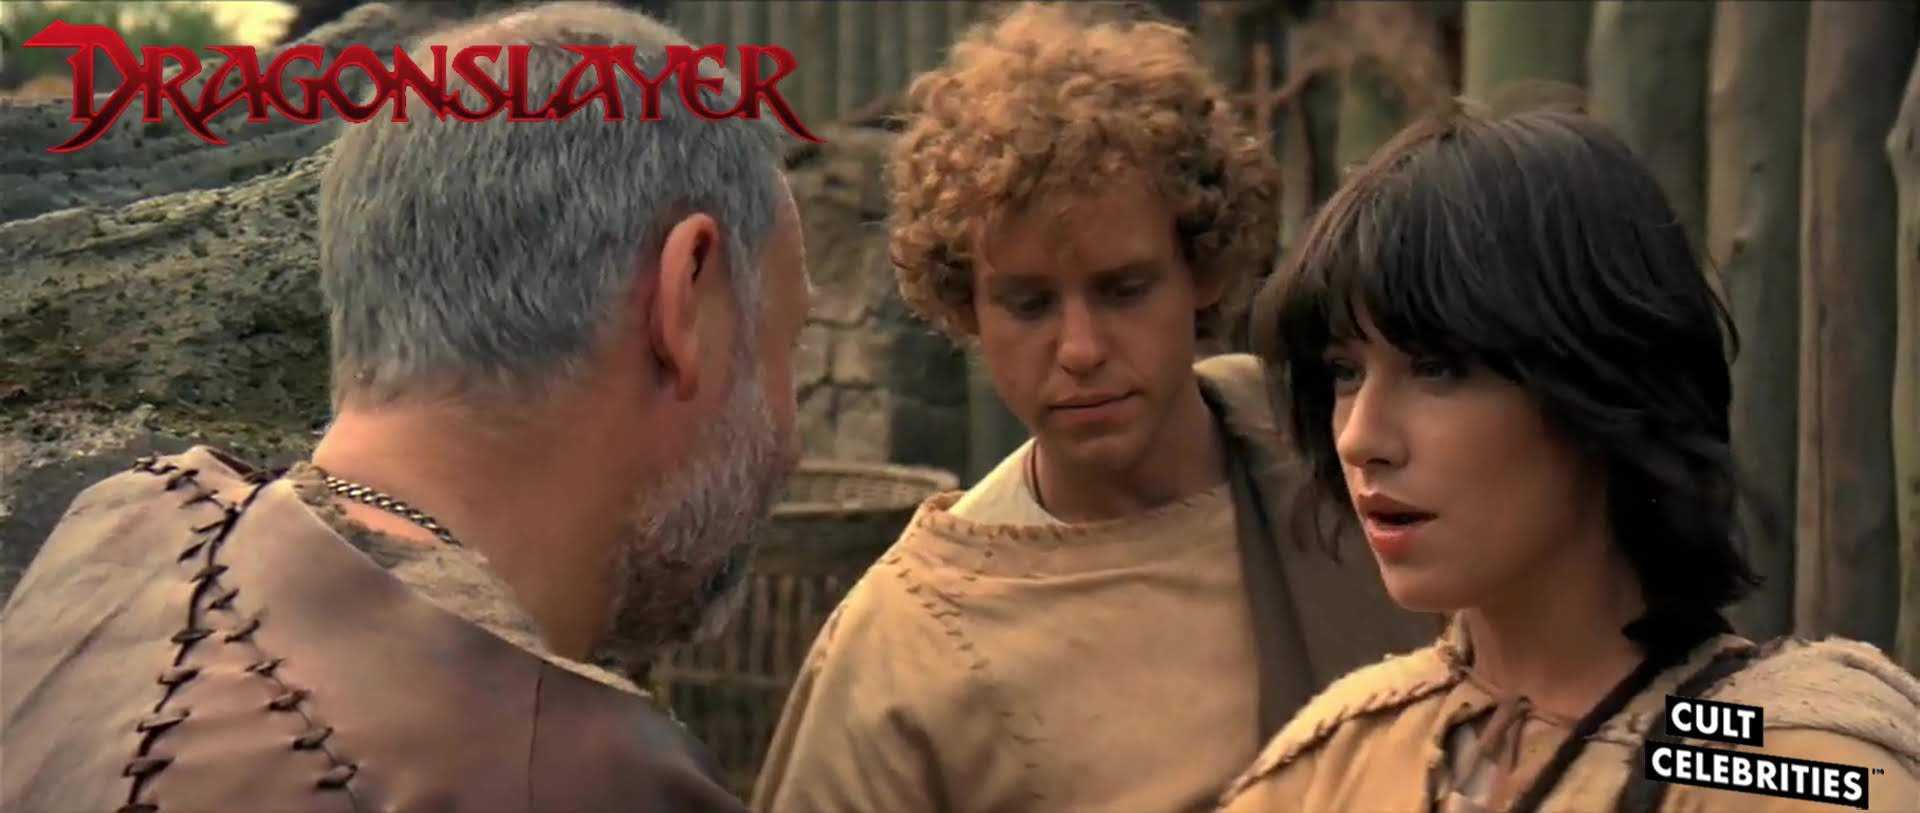 Peter MacNicol and Caitlin Clarke in Dragonslayer (1981)